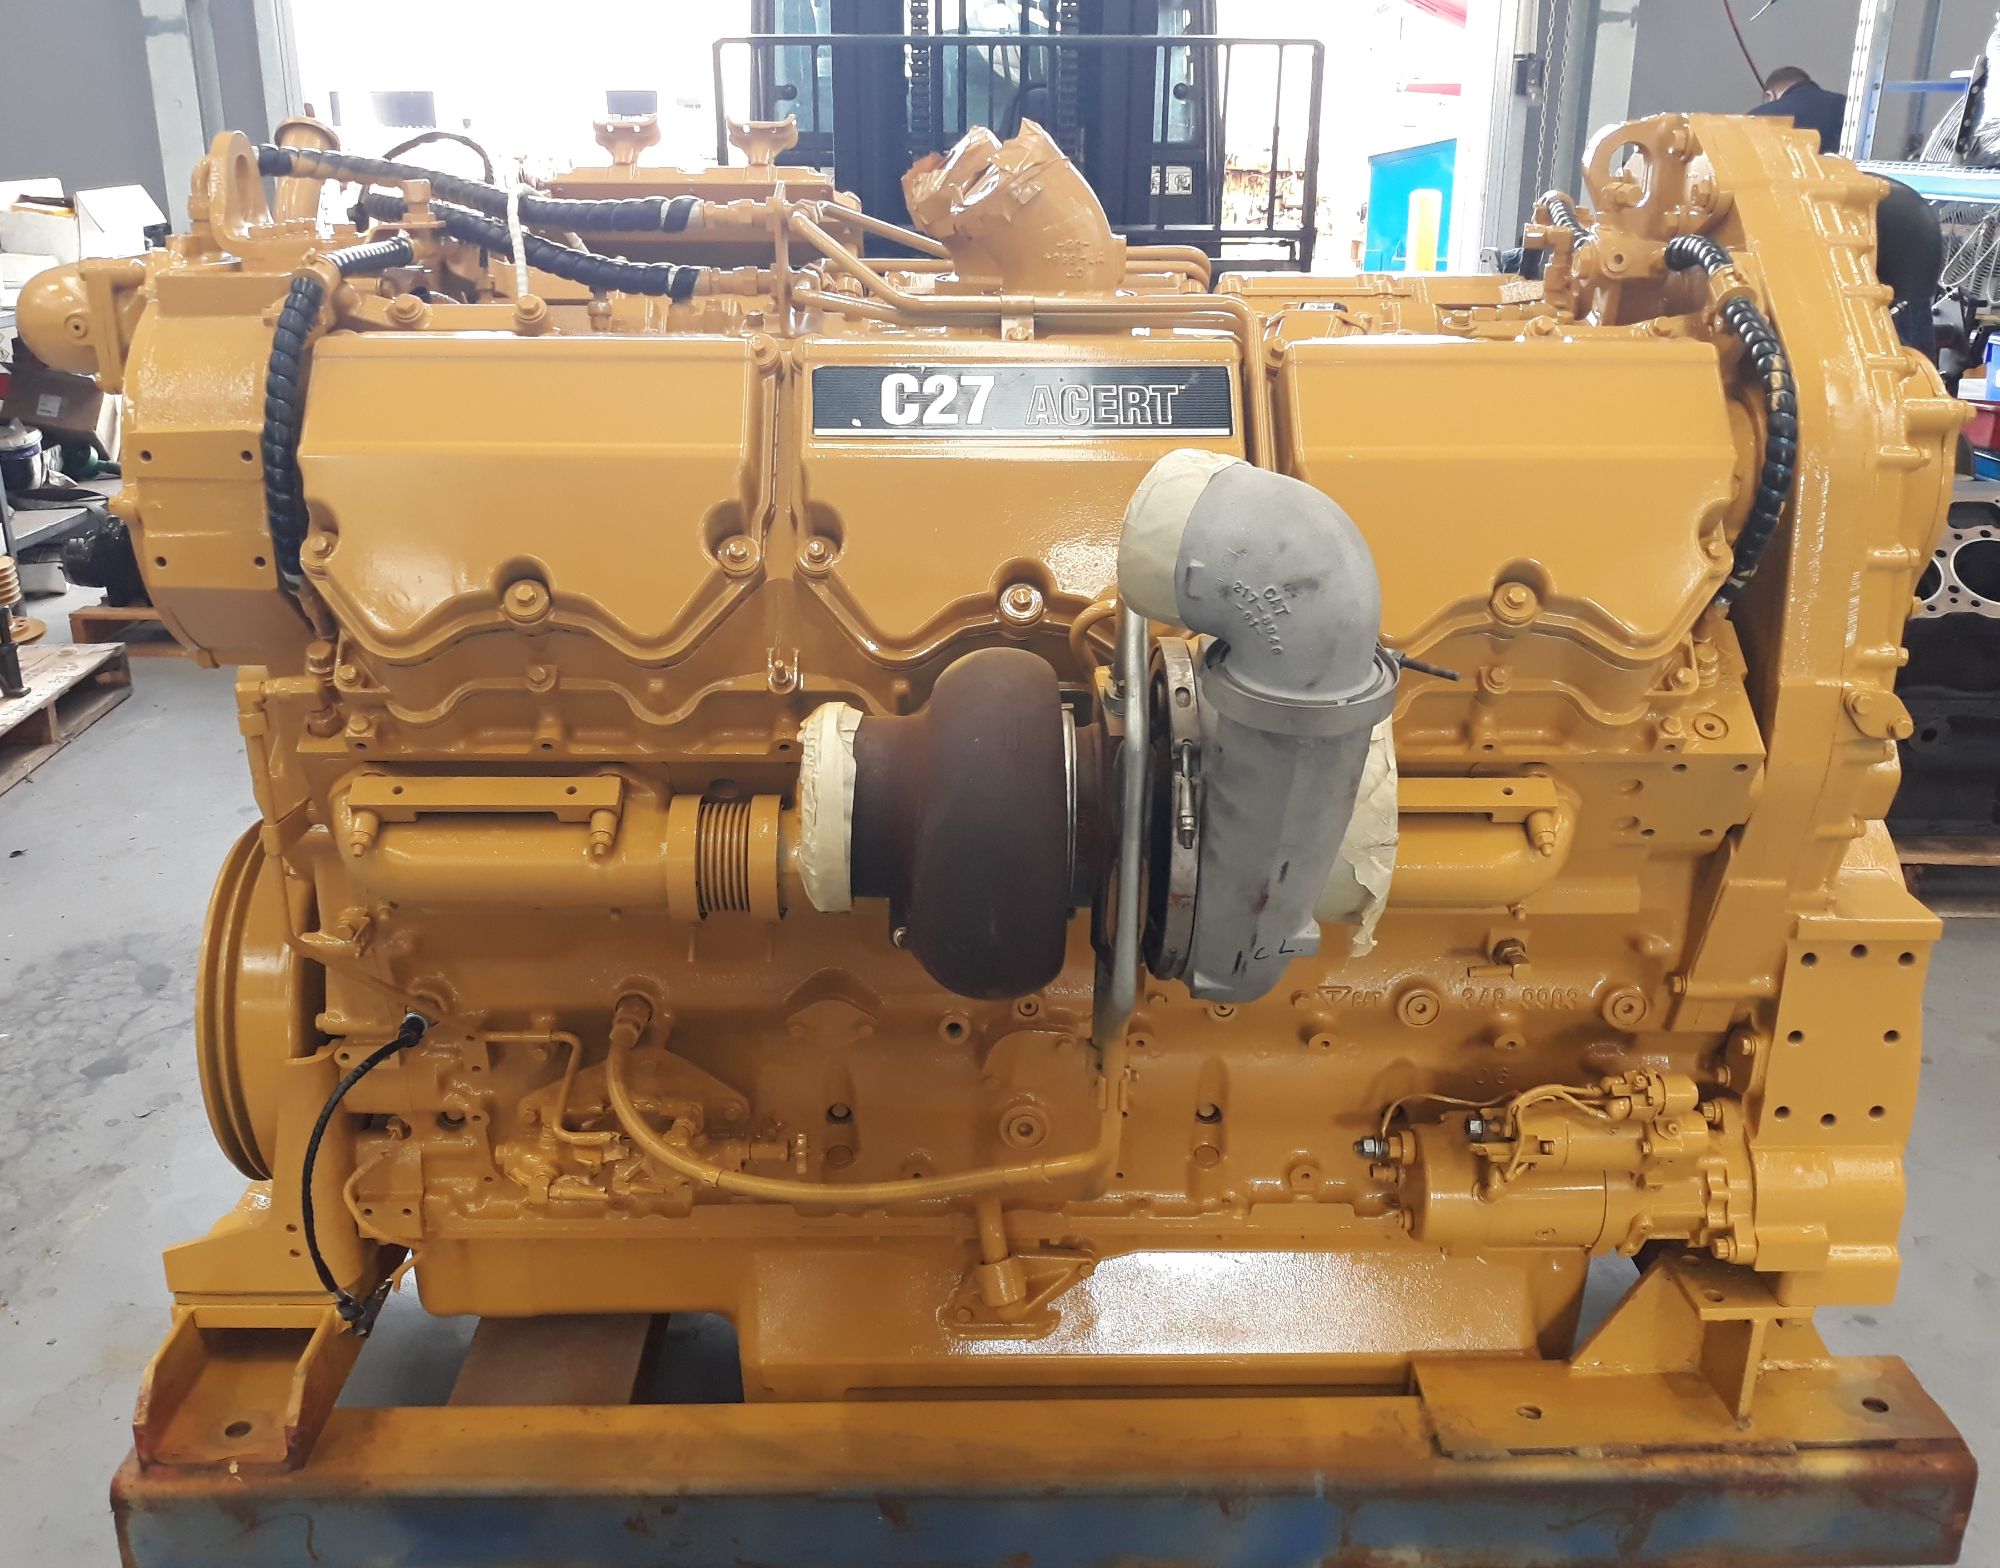 CAT C27 Acert Fully Remanufactured by Bells Engines in Australia